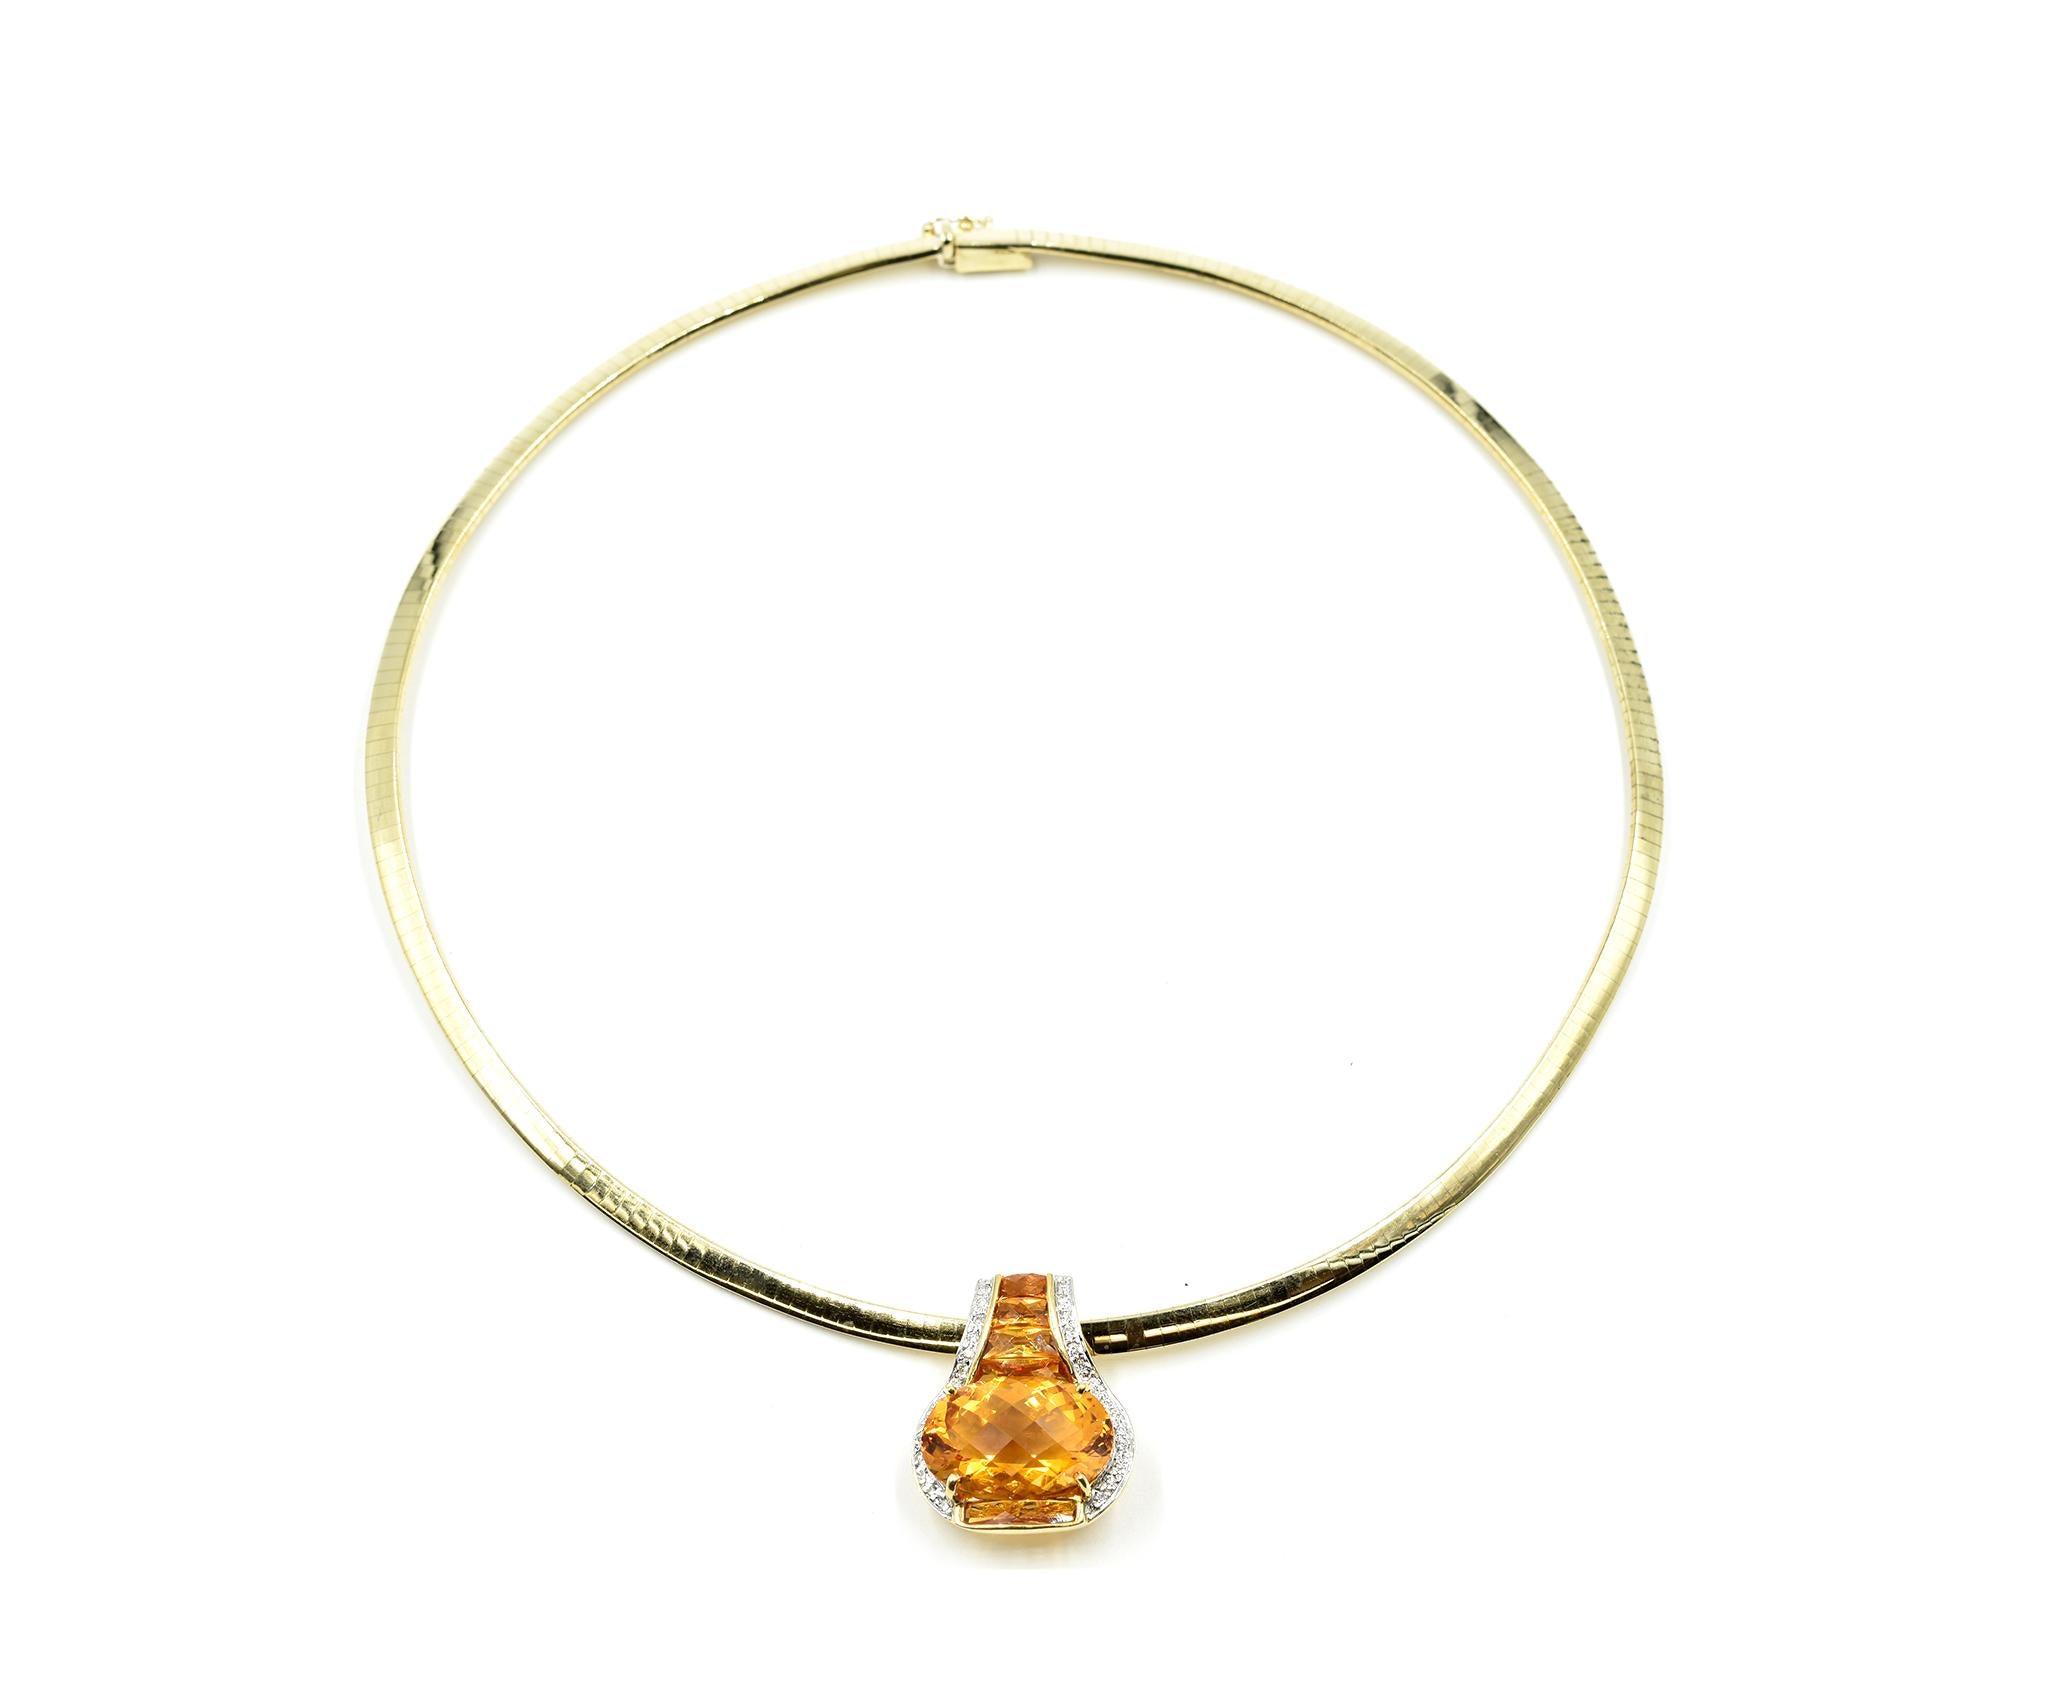 Designer: custom design
Material: 14k yellow gold
Gemstone: citrine
Diamonds: 28 round brilliant cut diamonds = 0.56 carat total weight
Color: H
Clarity: SI1
Dimensions: pendant measures 1-inch long and 1-inch wide, necklace measures 16-inches long